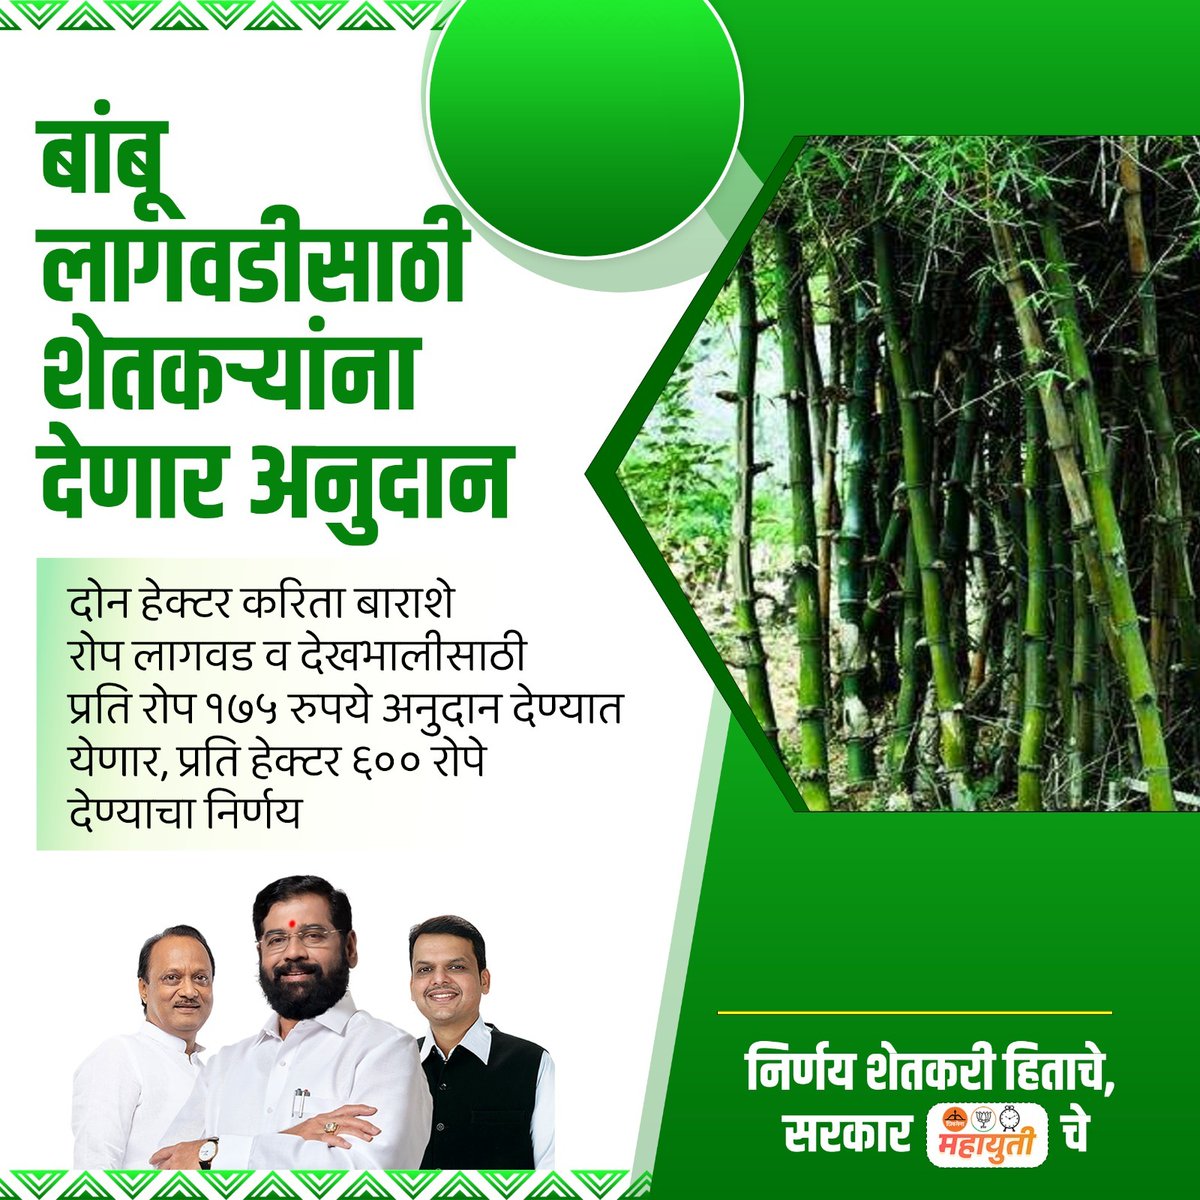 Kudos to CM Eknath Shinde for prioritizing the growth of bamboo cultivation! With a subsidy of Rupees 175 per plant, farmers are empowered to enhance their income while contributing to environmental conservation.